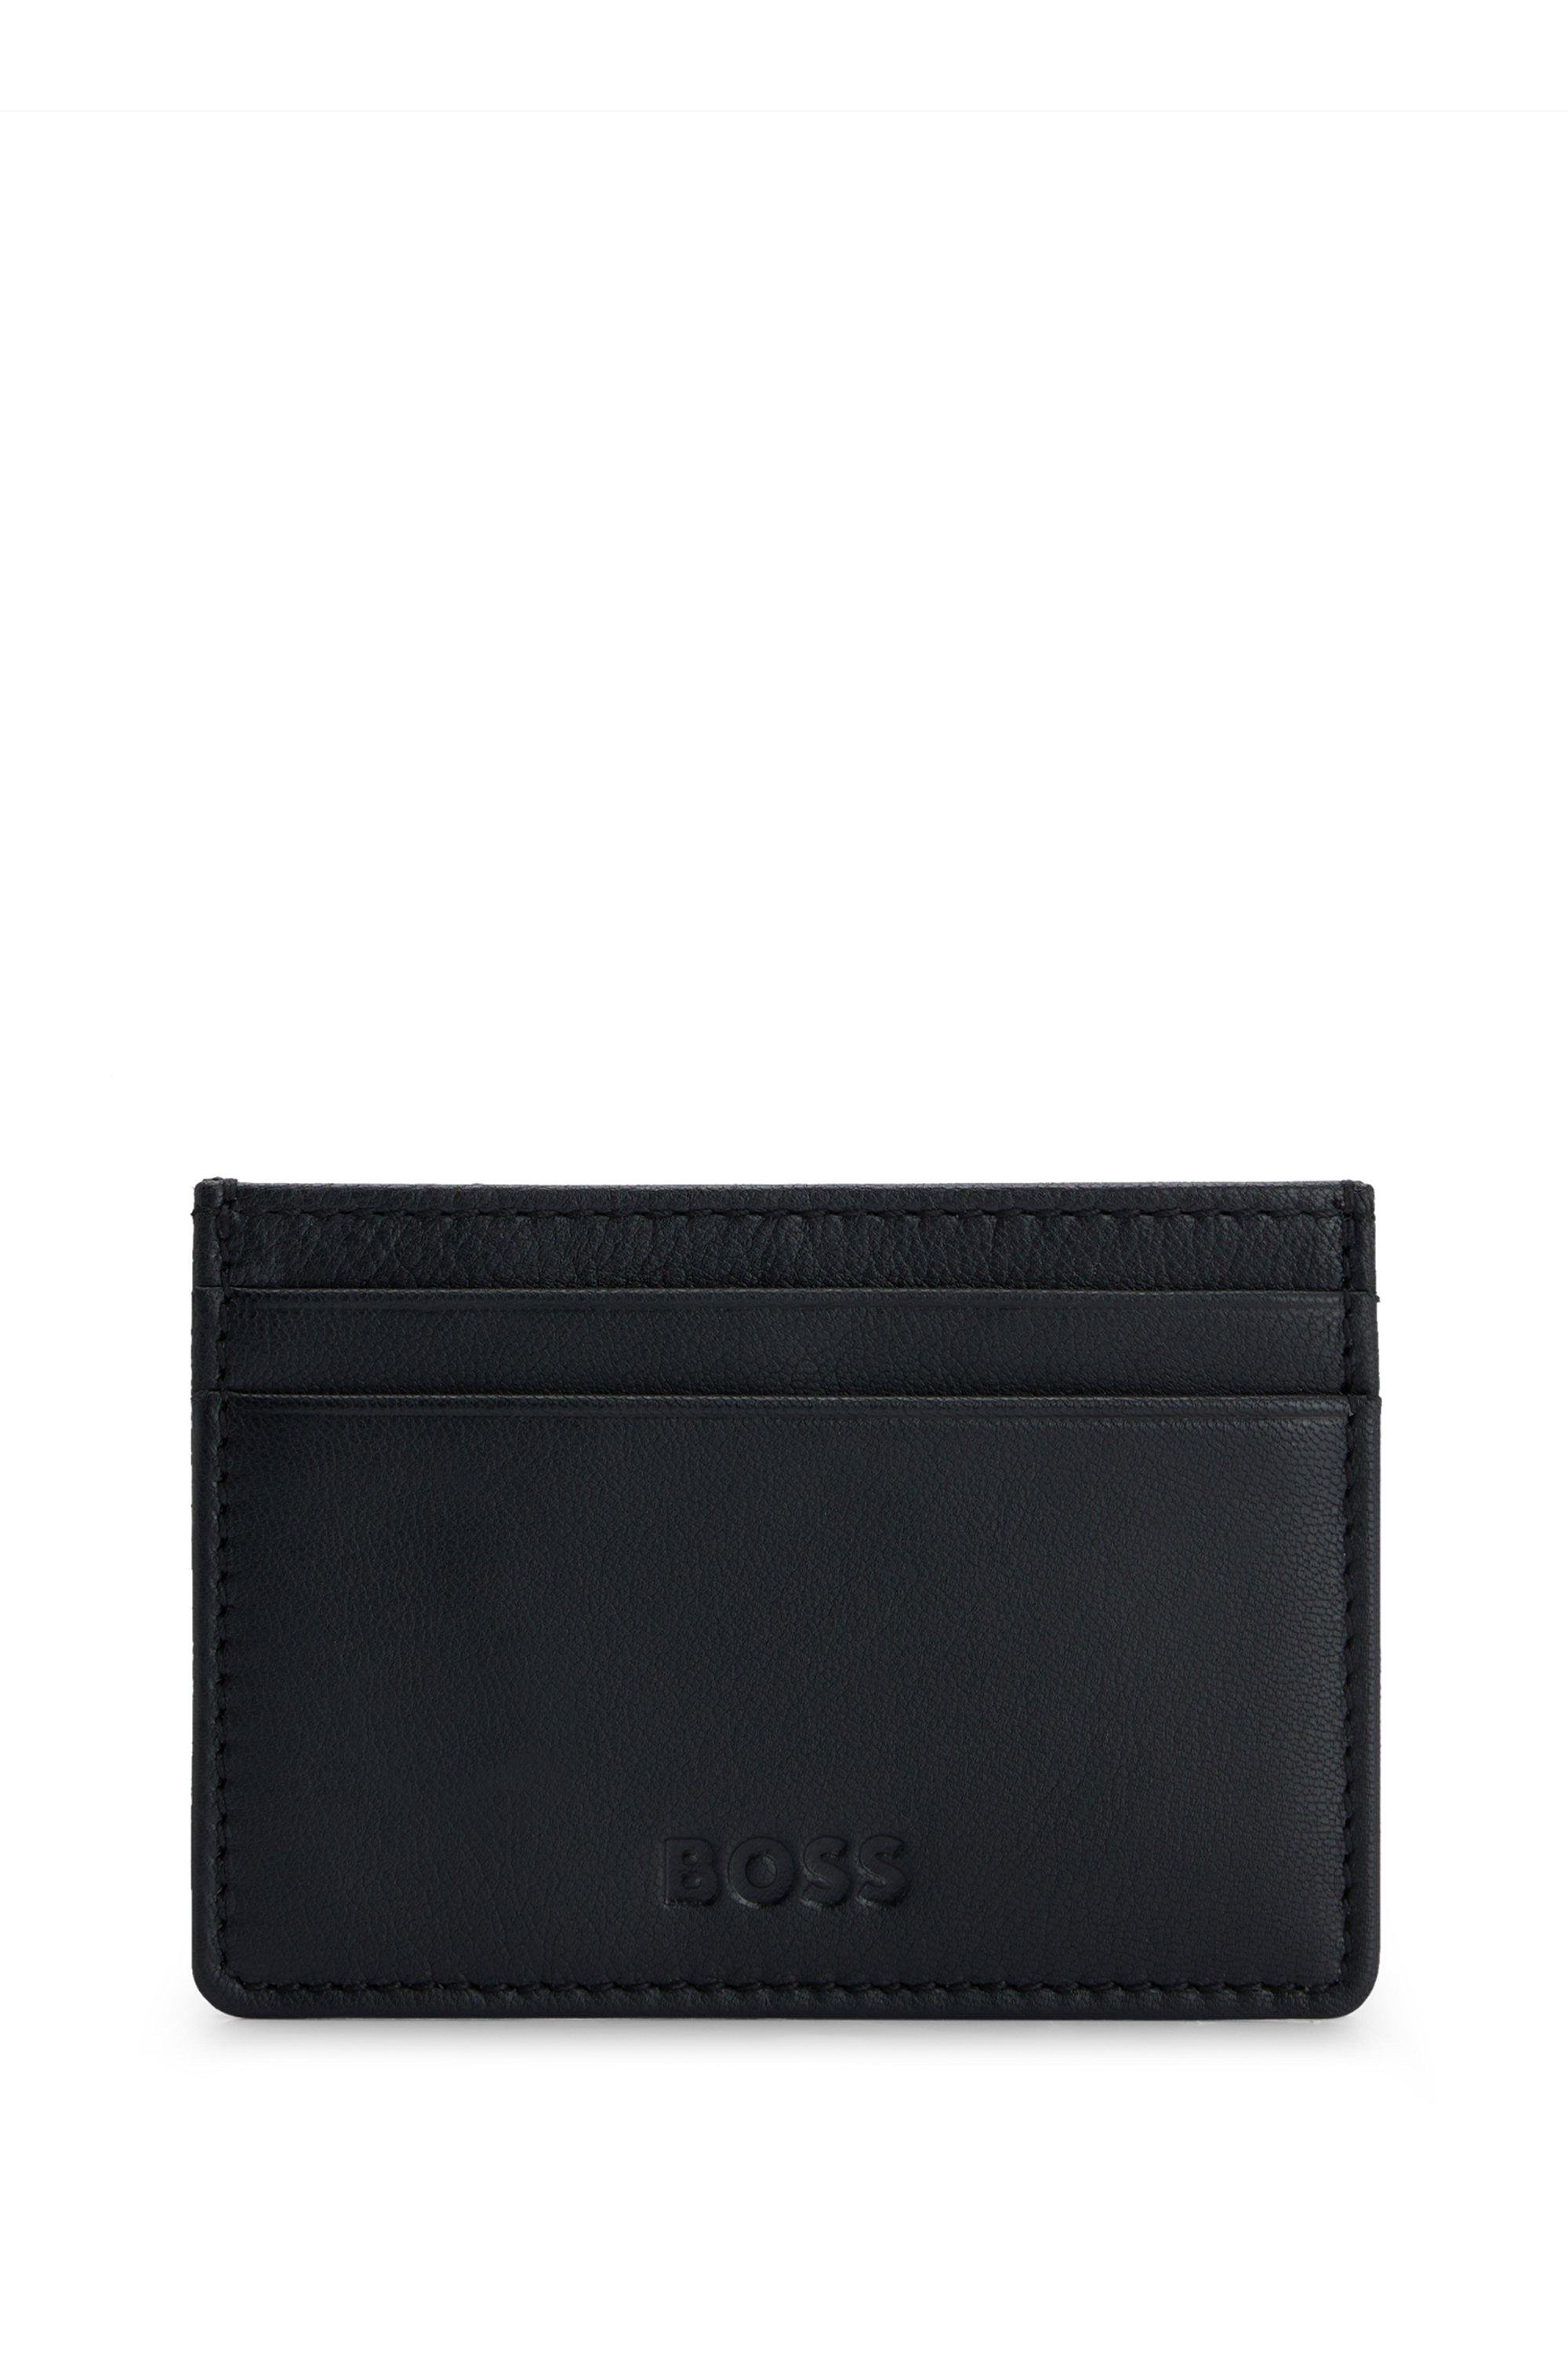 BOSS by HUGO BOSS Money Clip Card Holder In Matte Leather With Logos in ...